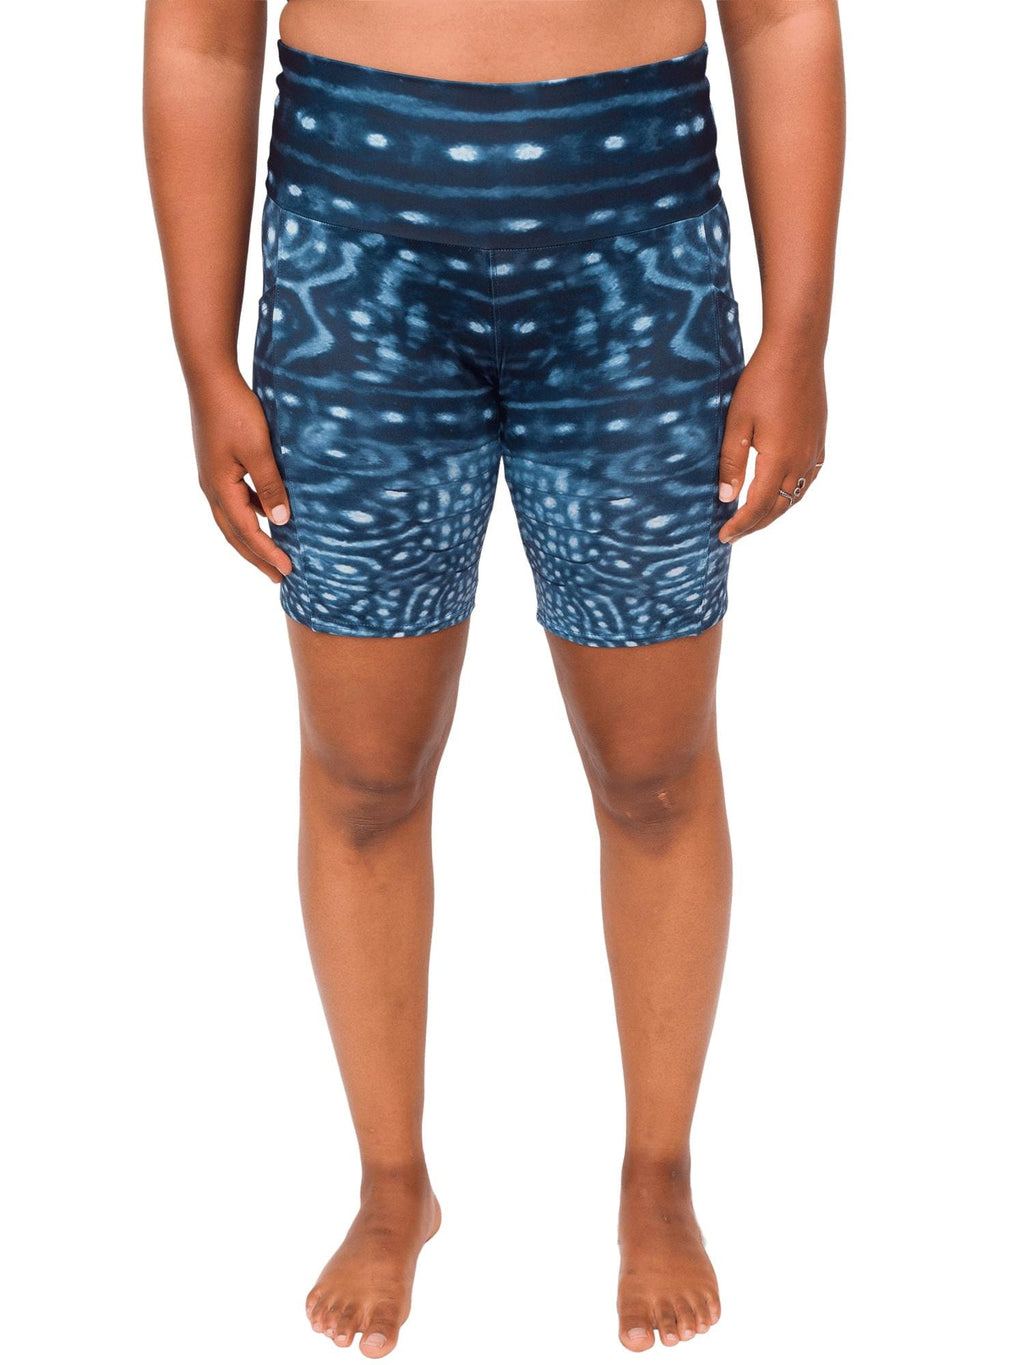 Waterlust whale shark printed biker shorts - front view